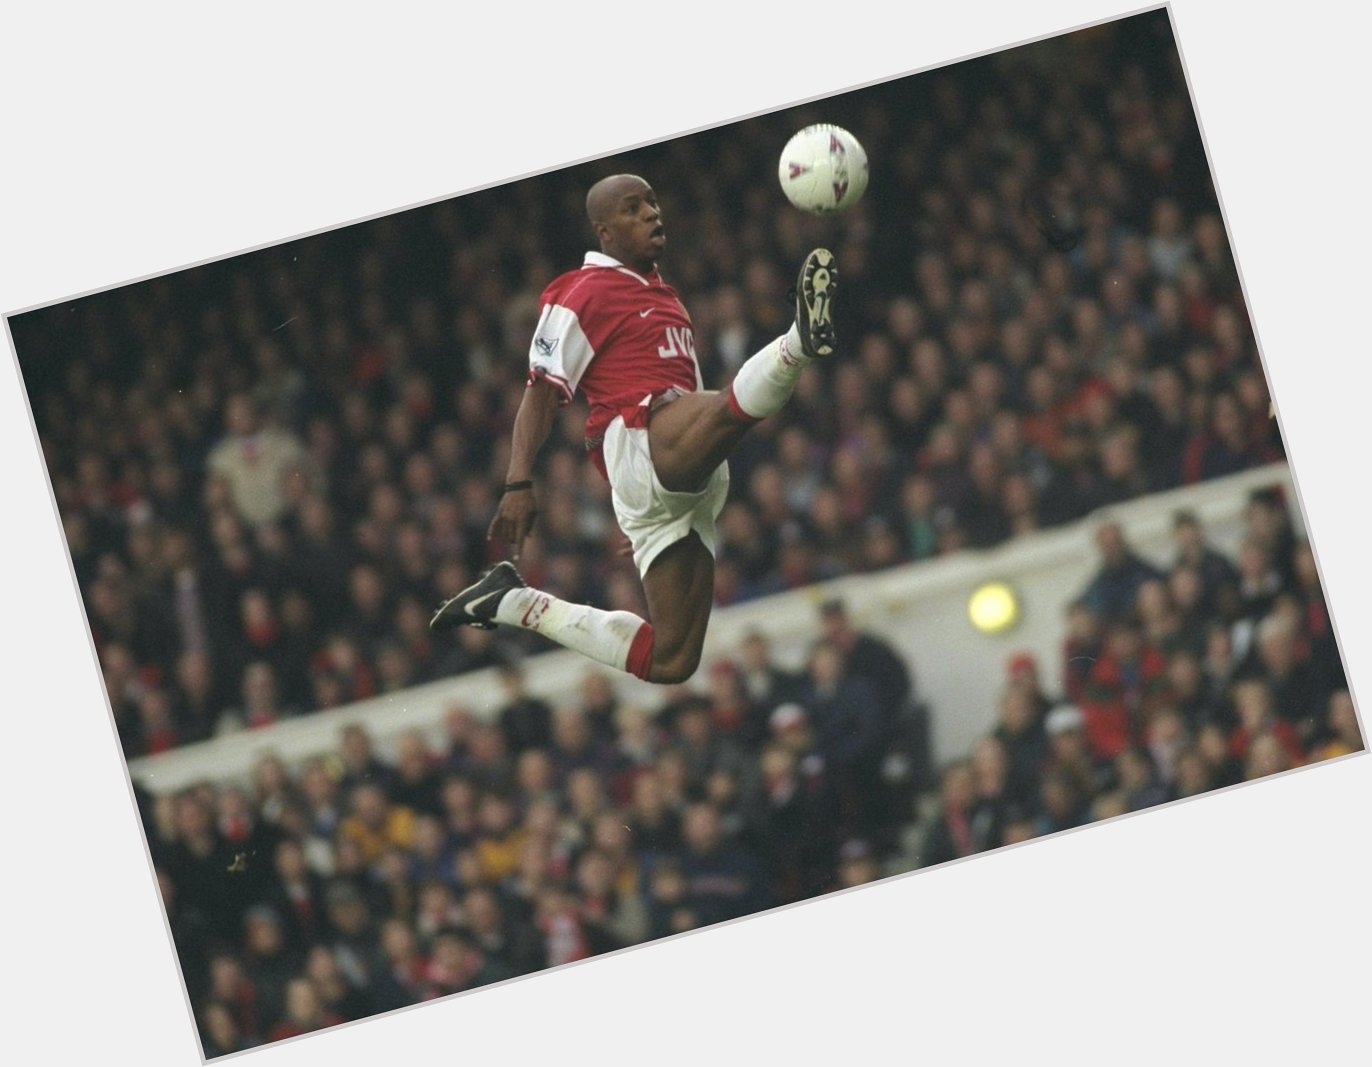 Happy 51st birthday to Ian Wright! Only Thierry Henry has scored more goals for Arsenal (228) than Wright (185). 